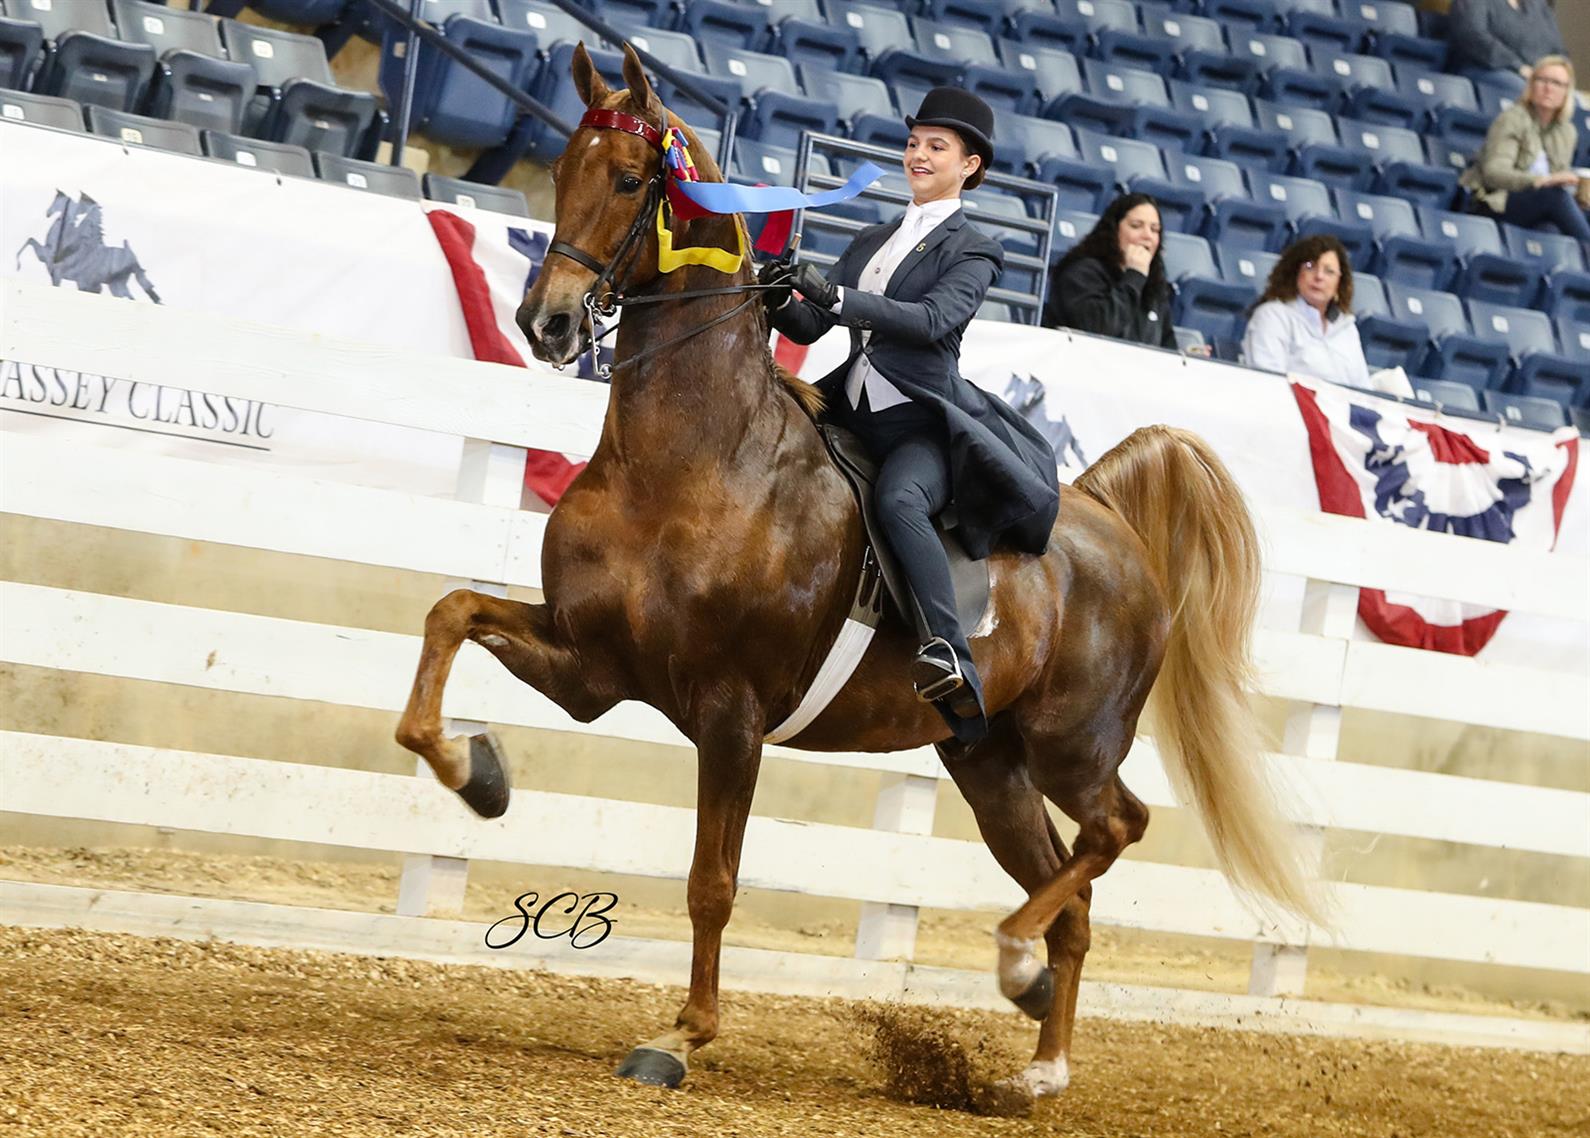 Saddle seat competitor at the JD Massey Classic Horse Show